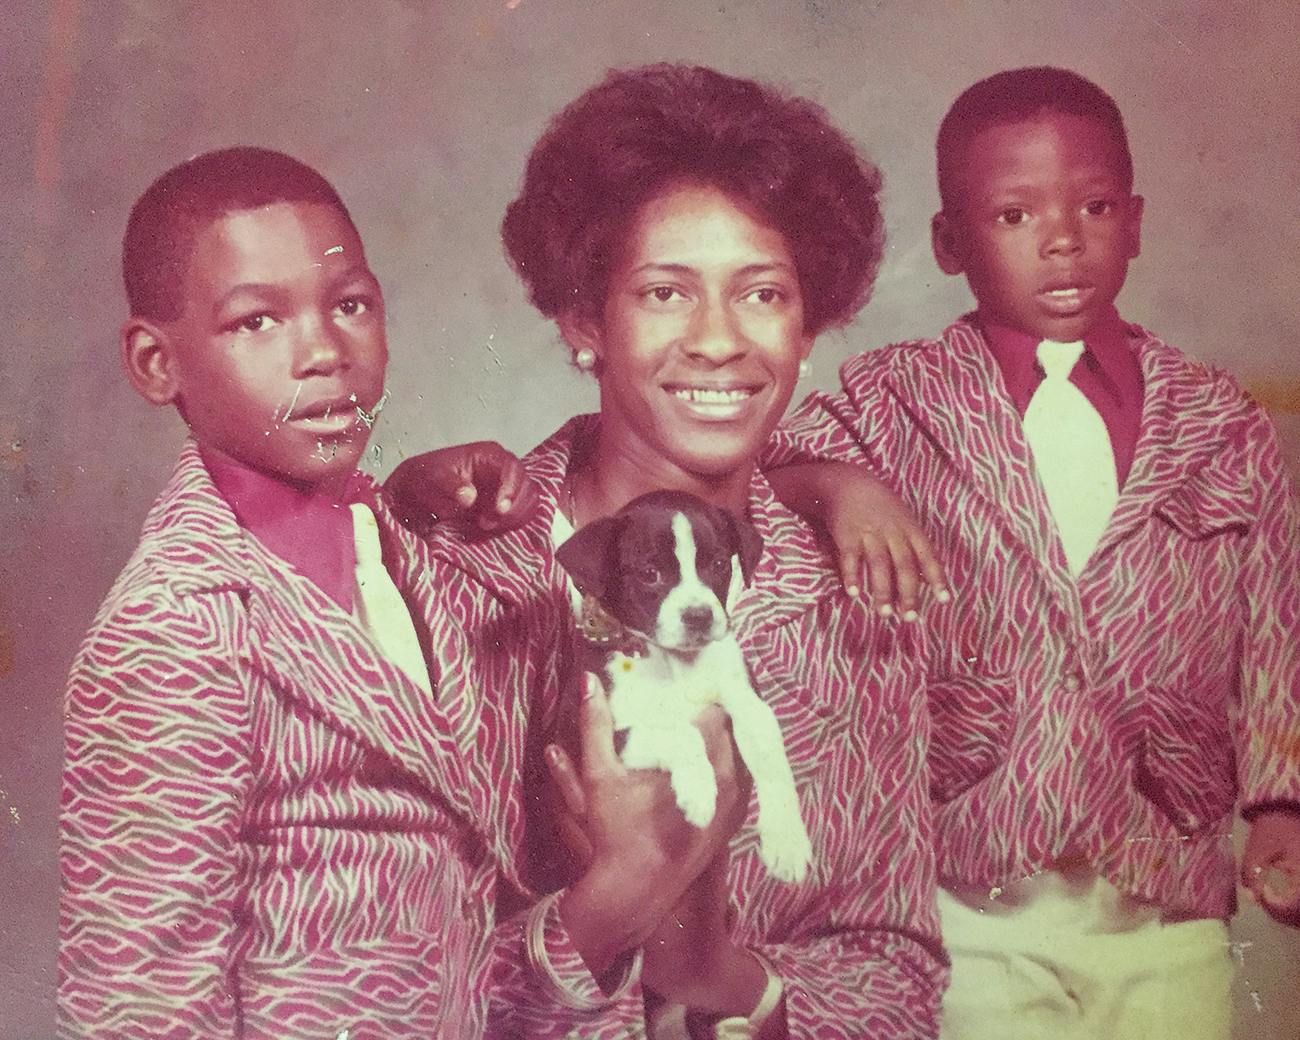 Ed, left, with his mom, Margie, and his brother, Kelvin, around 1975.